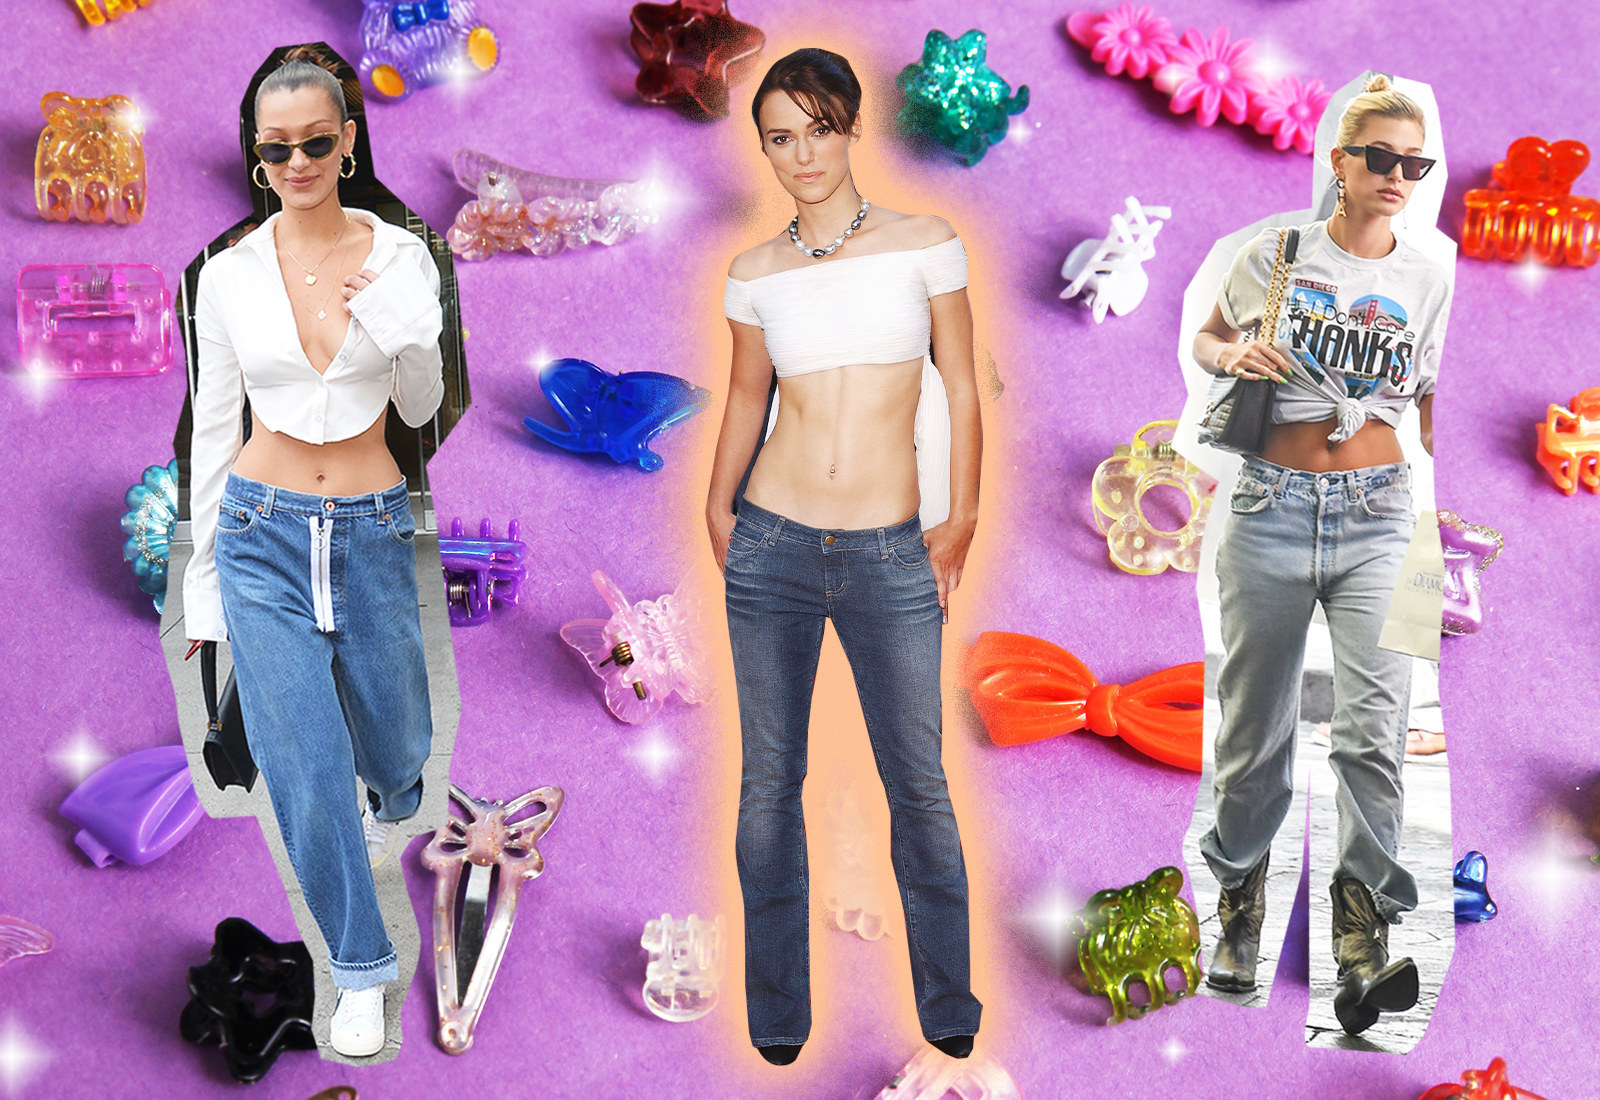 After all things ugly, social media is going crazy for the 'weird girl'  aesthetic, Fashion